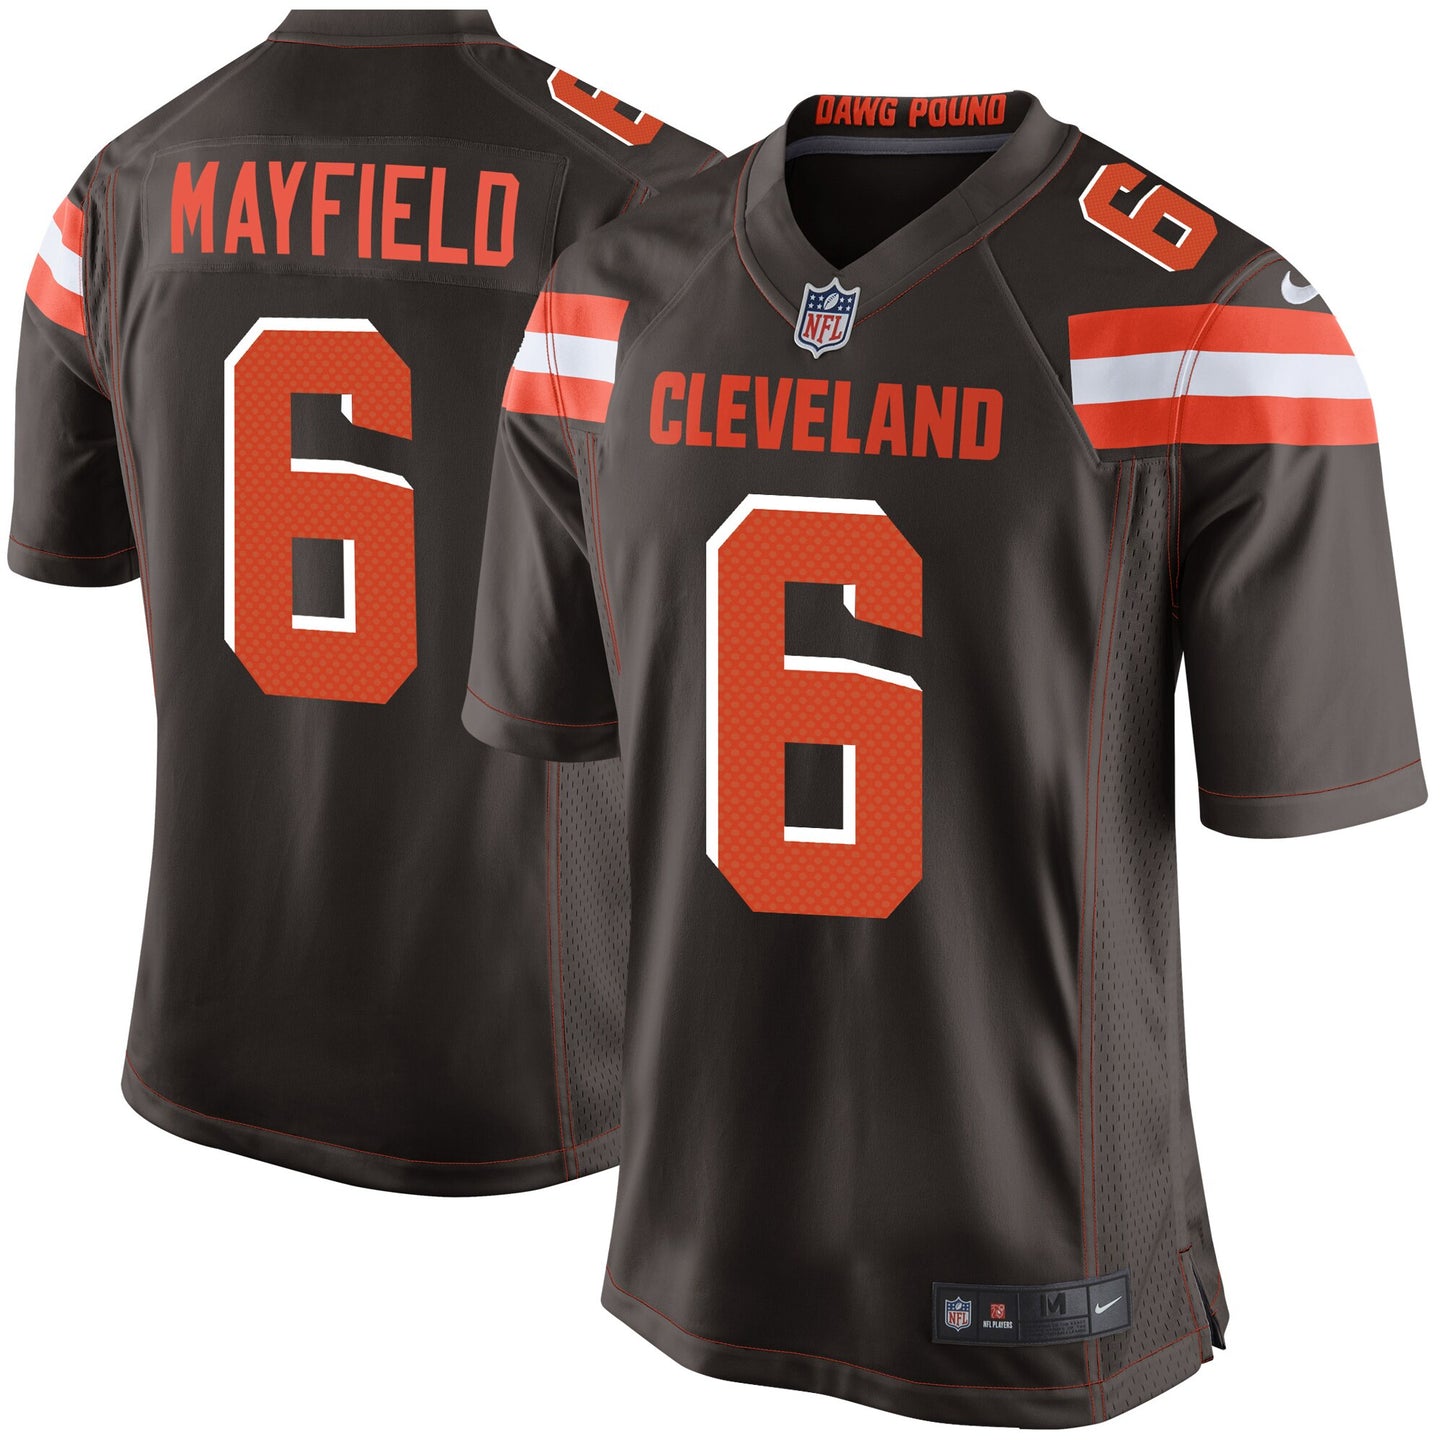 Cleveland Browns Nike #6  Baker Mayfield Youth Jersey-Brown